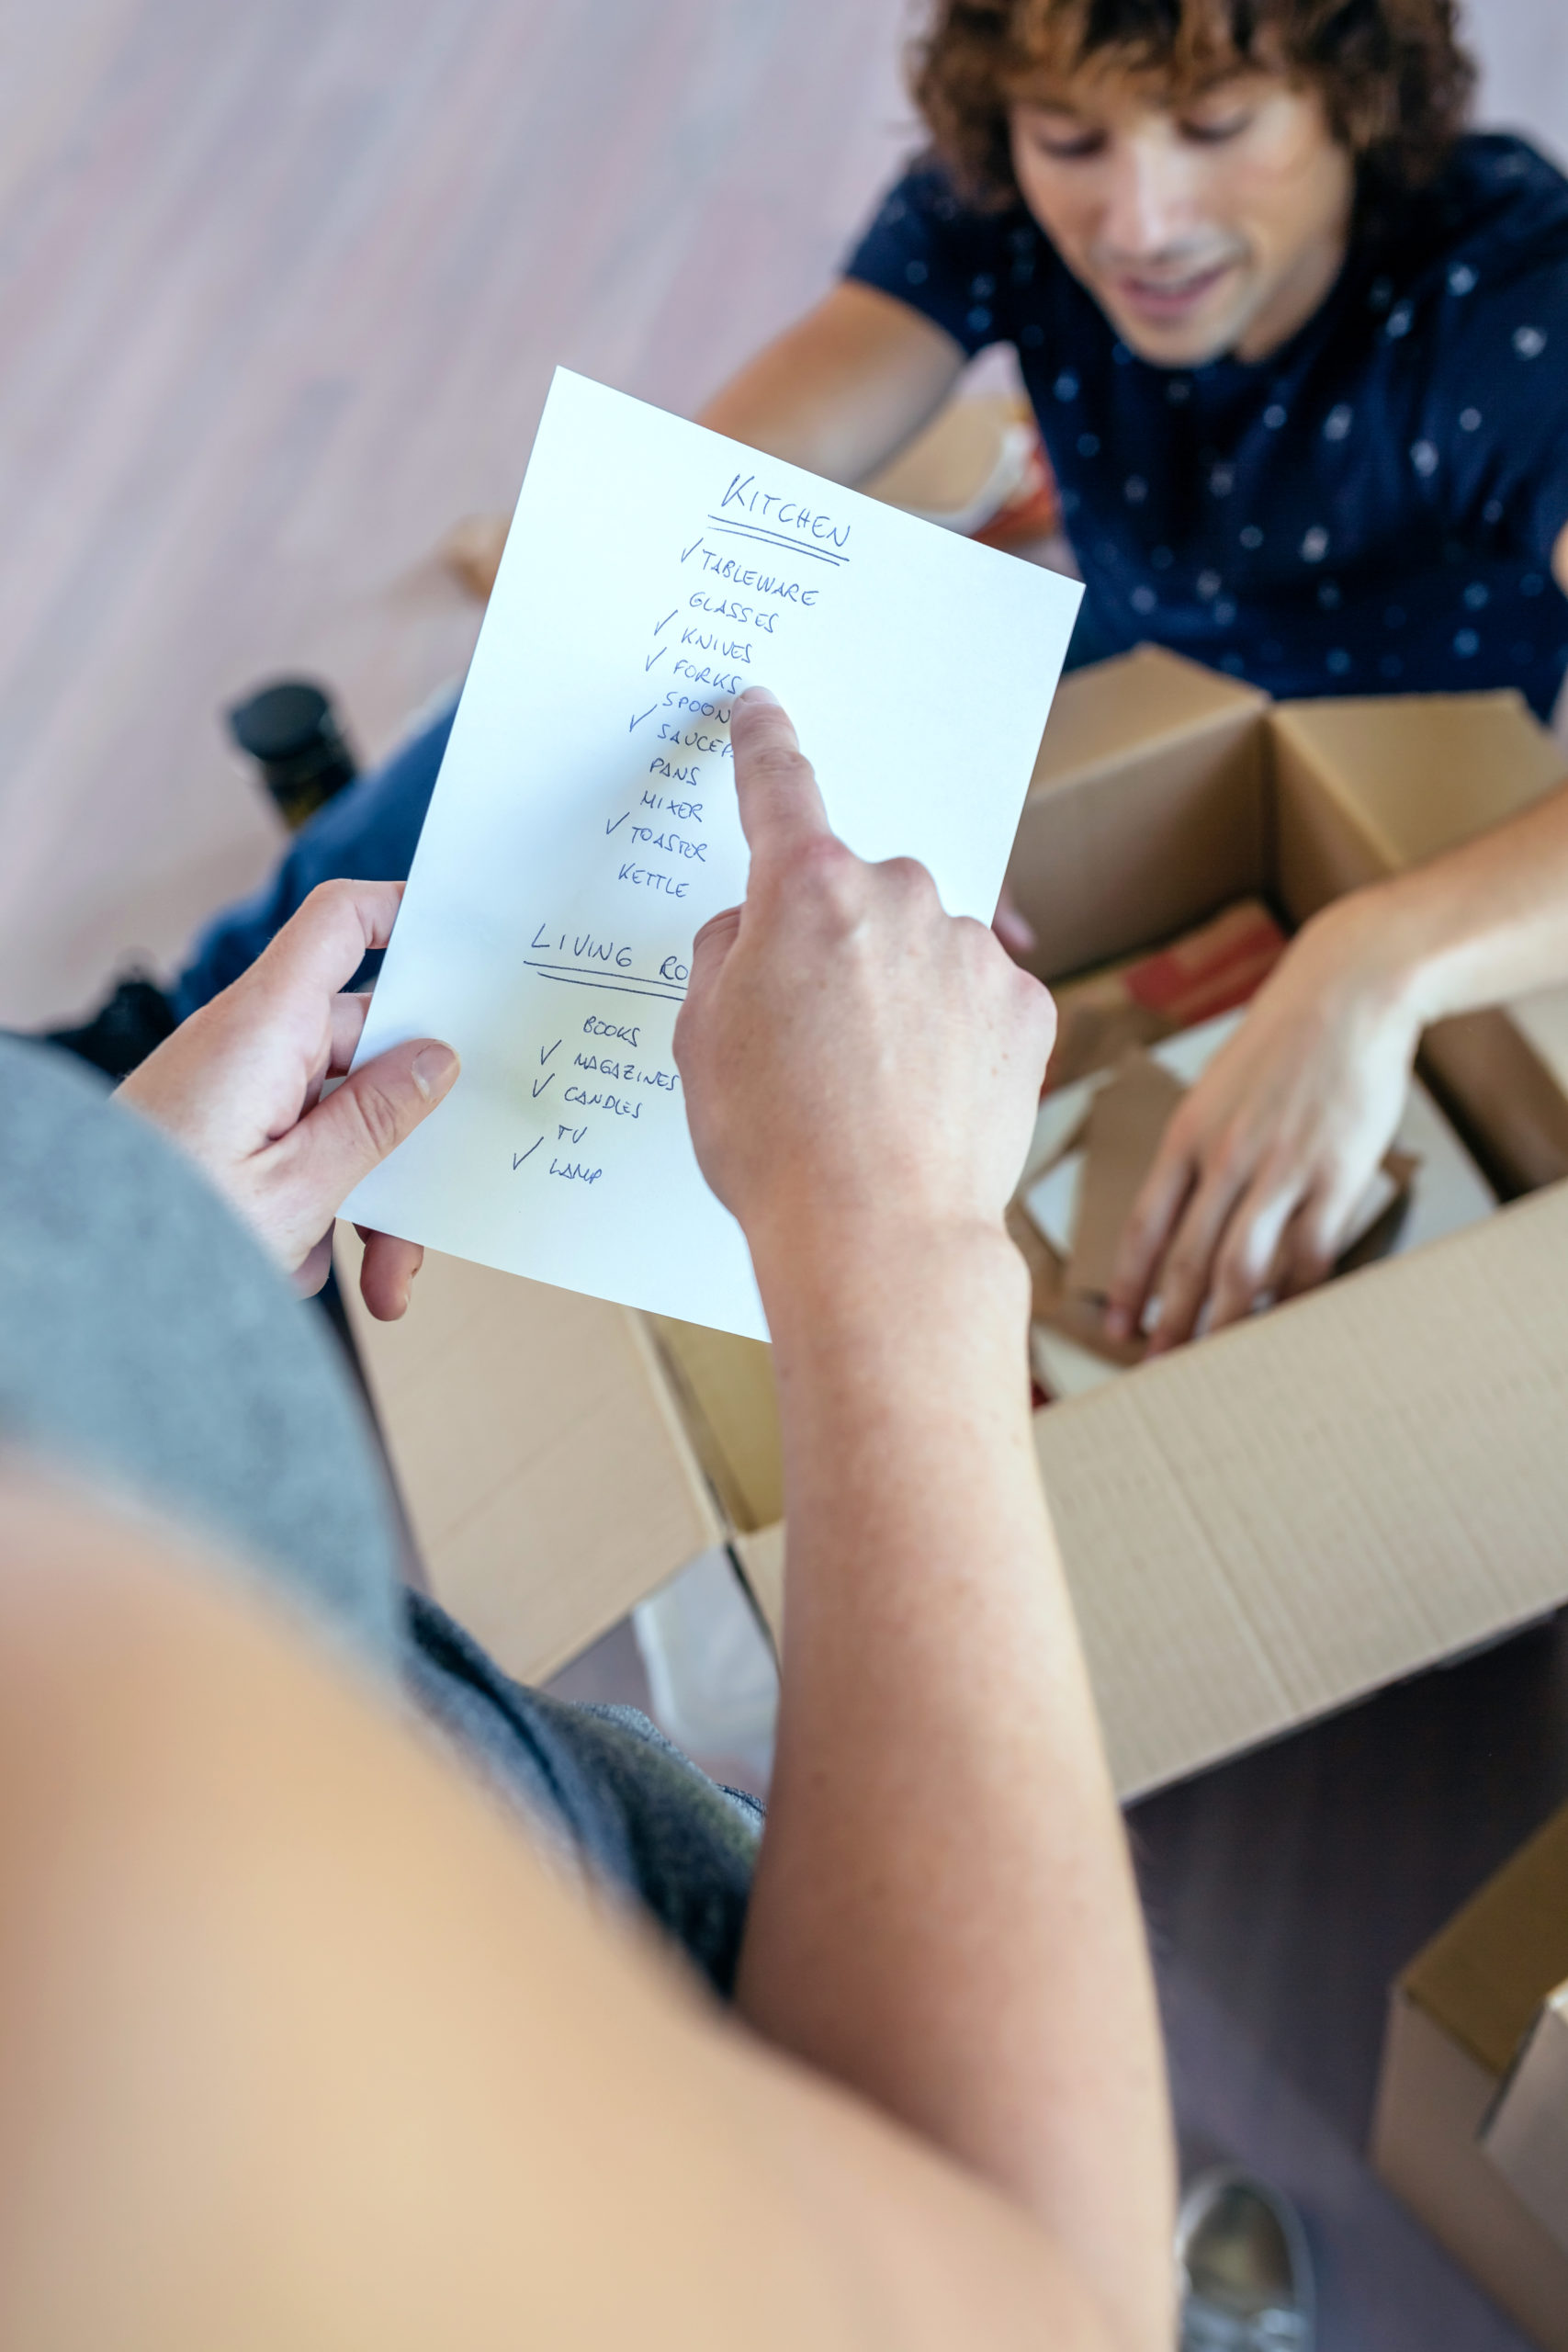 Best Packing and Moving Tips: How to Make Relocating Less Stressful